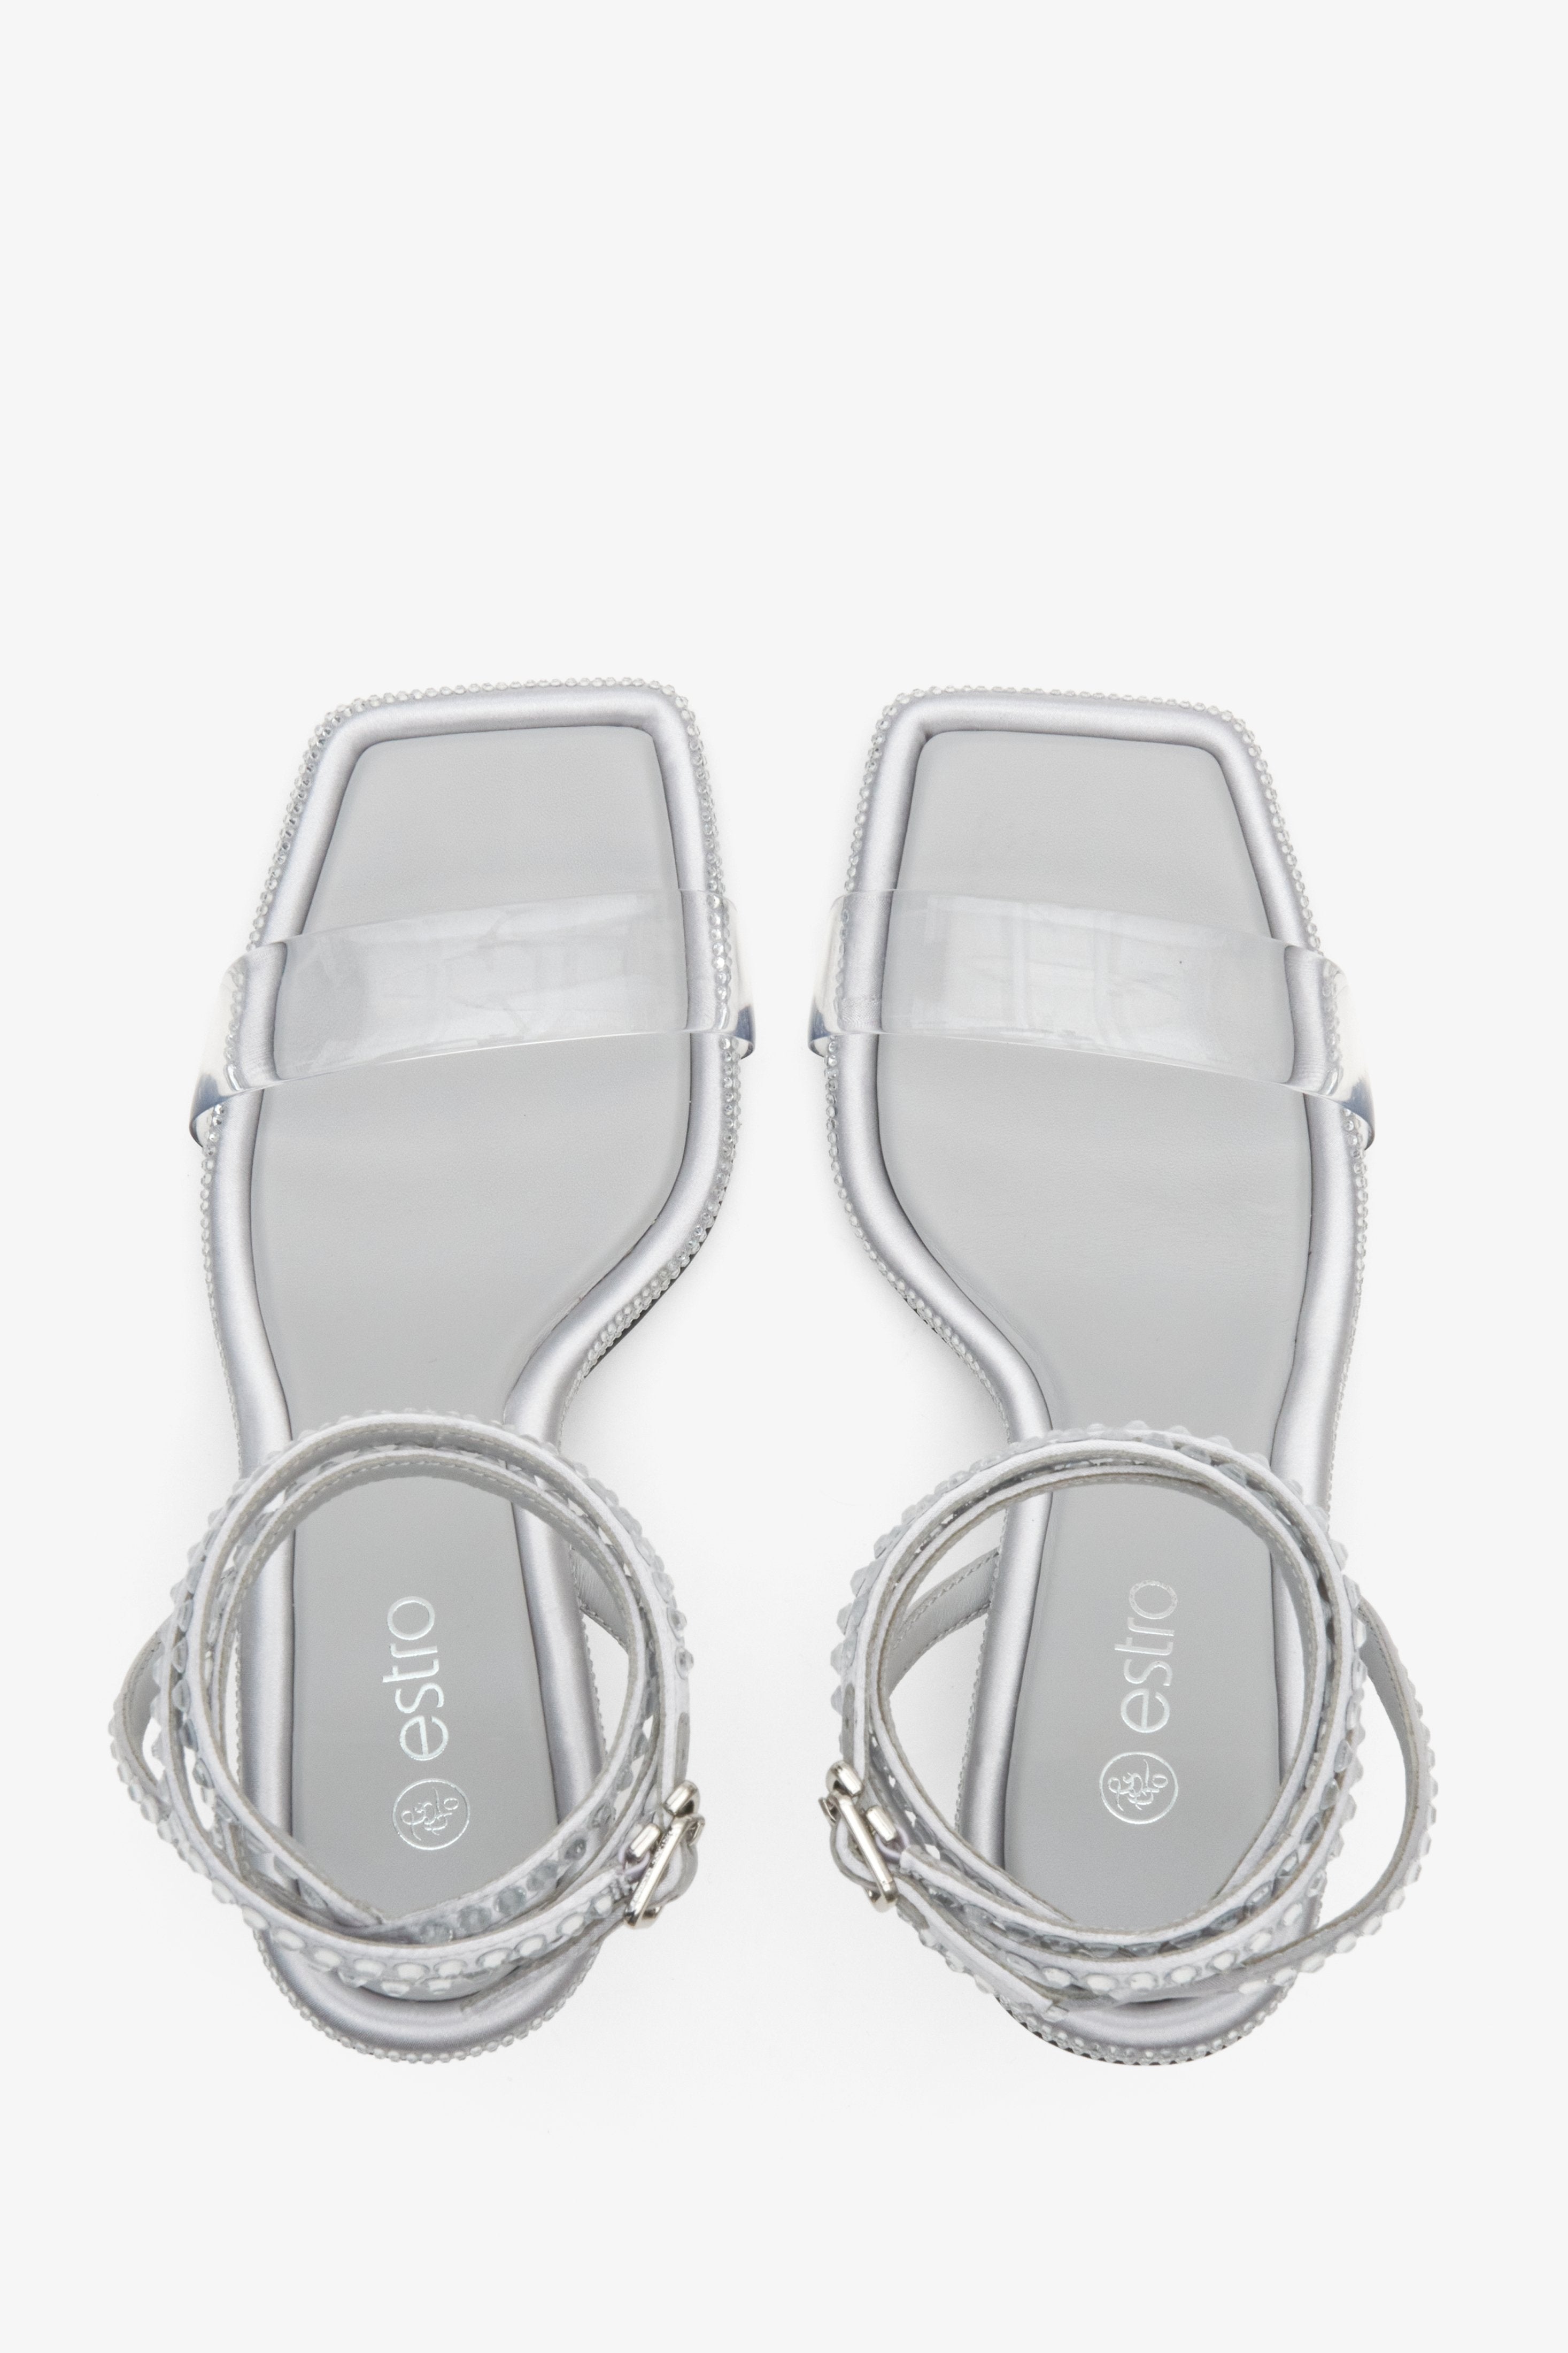 Women's silver sparkly heeled sandals Estro - presentation from above.